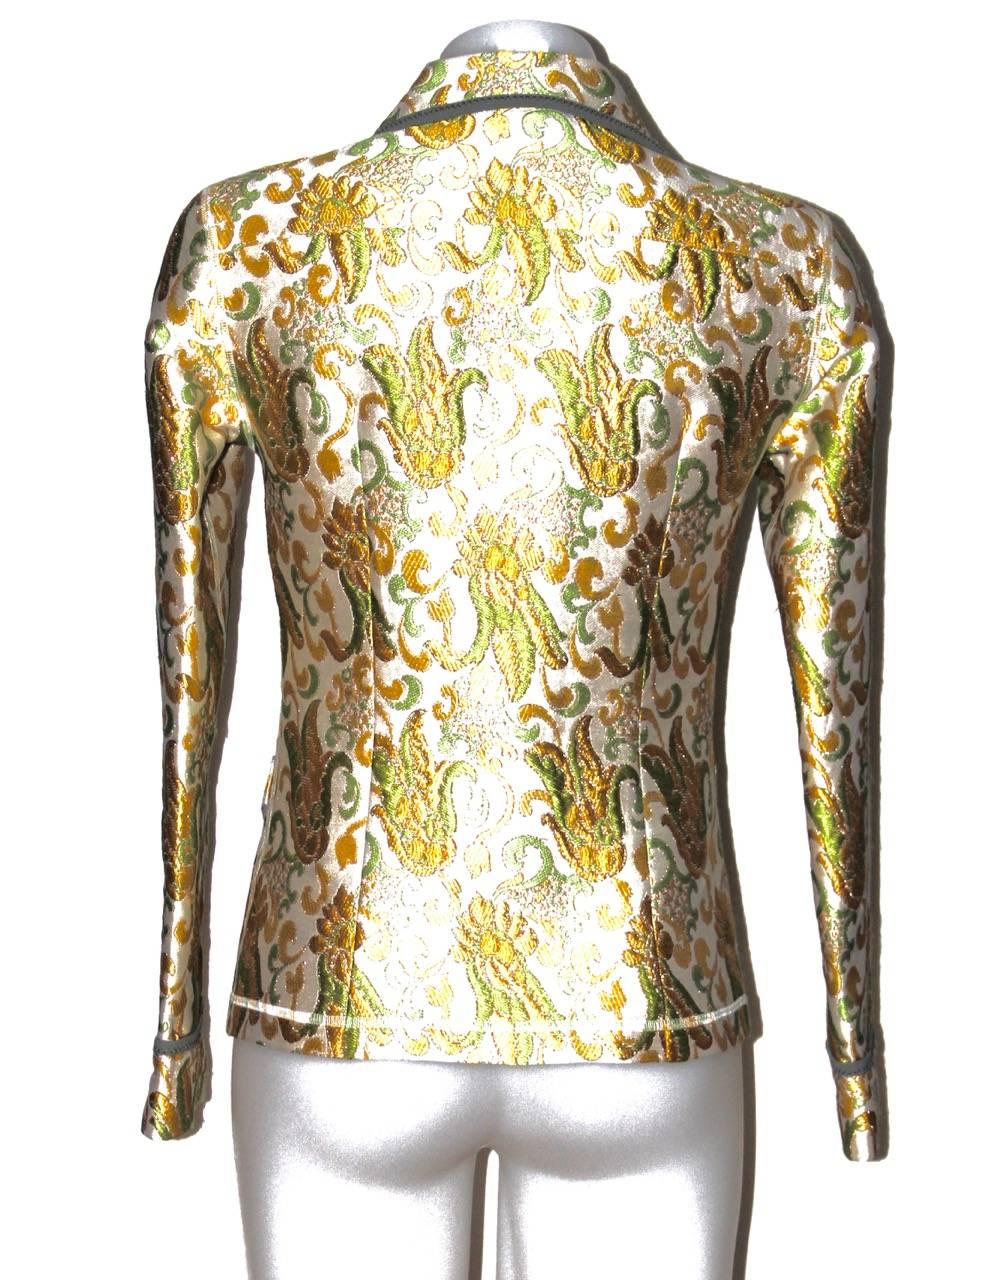 This dazzling Prada jacket features a jacquard print seen on the spring 2015 catwalk. Three front slit pockets: two at the waist, one at the breast. Front buttons closure. 

Collection: 2015
Fabric: Jacquard
Color: Green, yellow, off-white
Size: FR